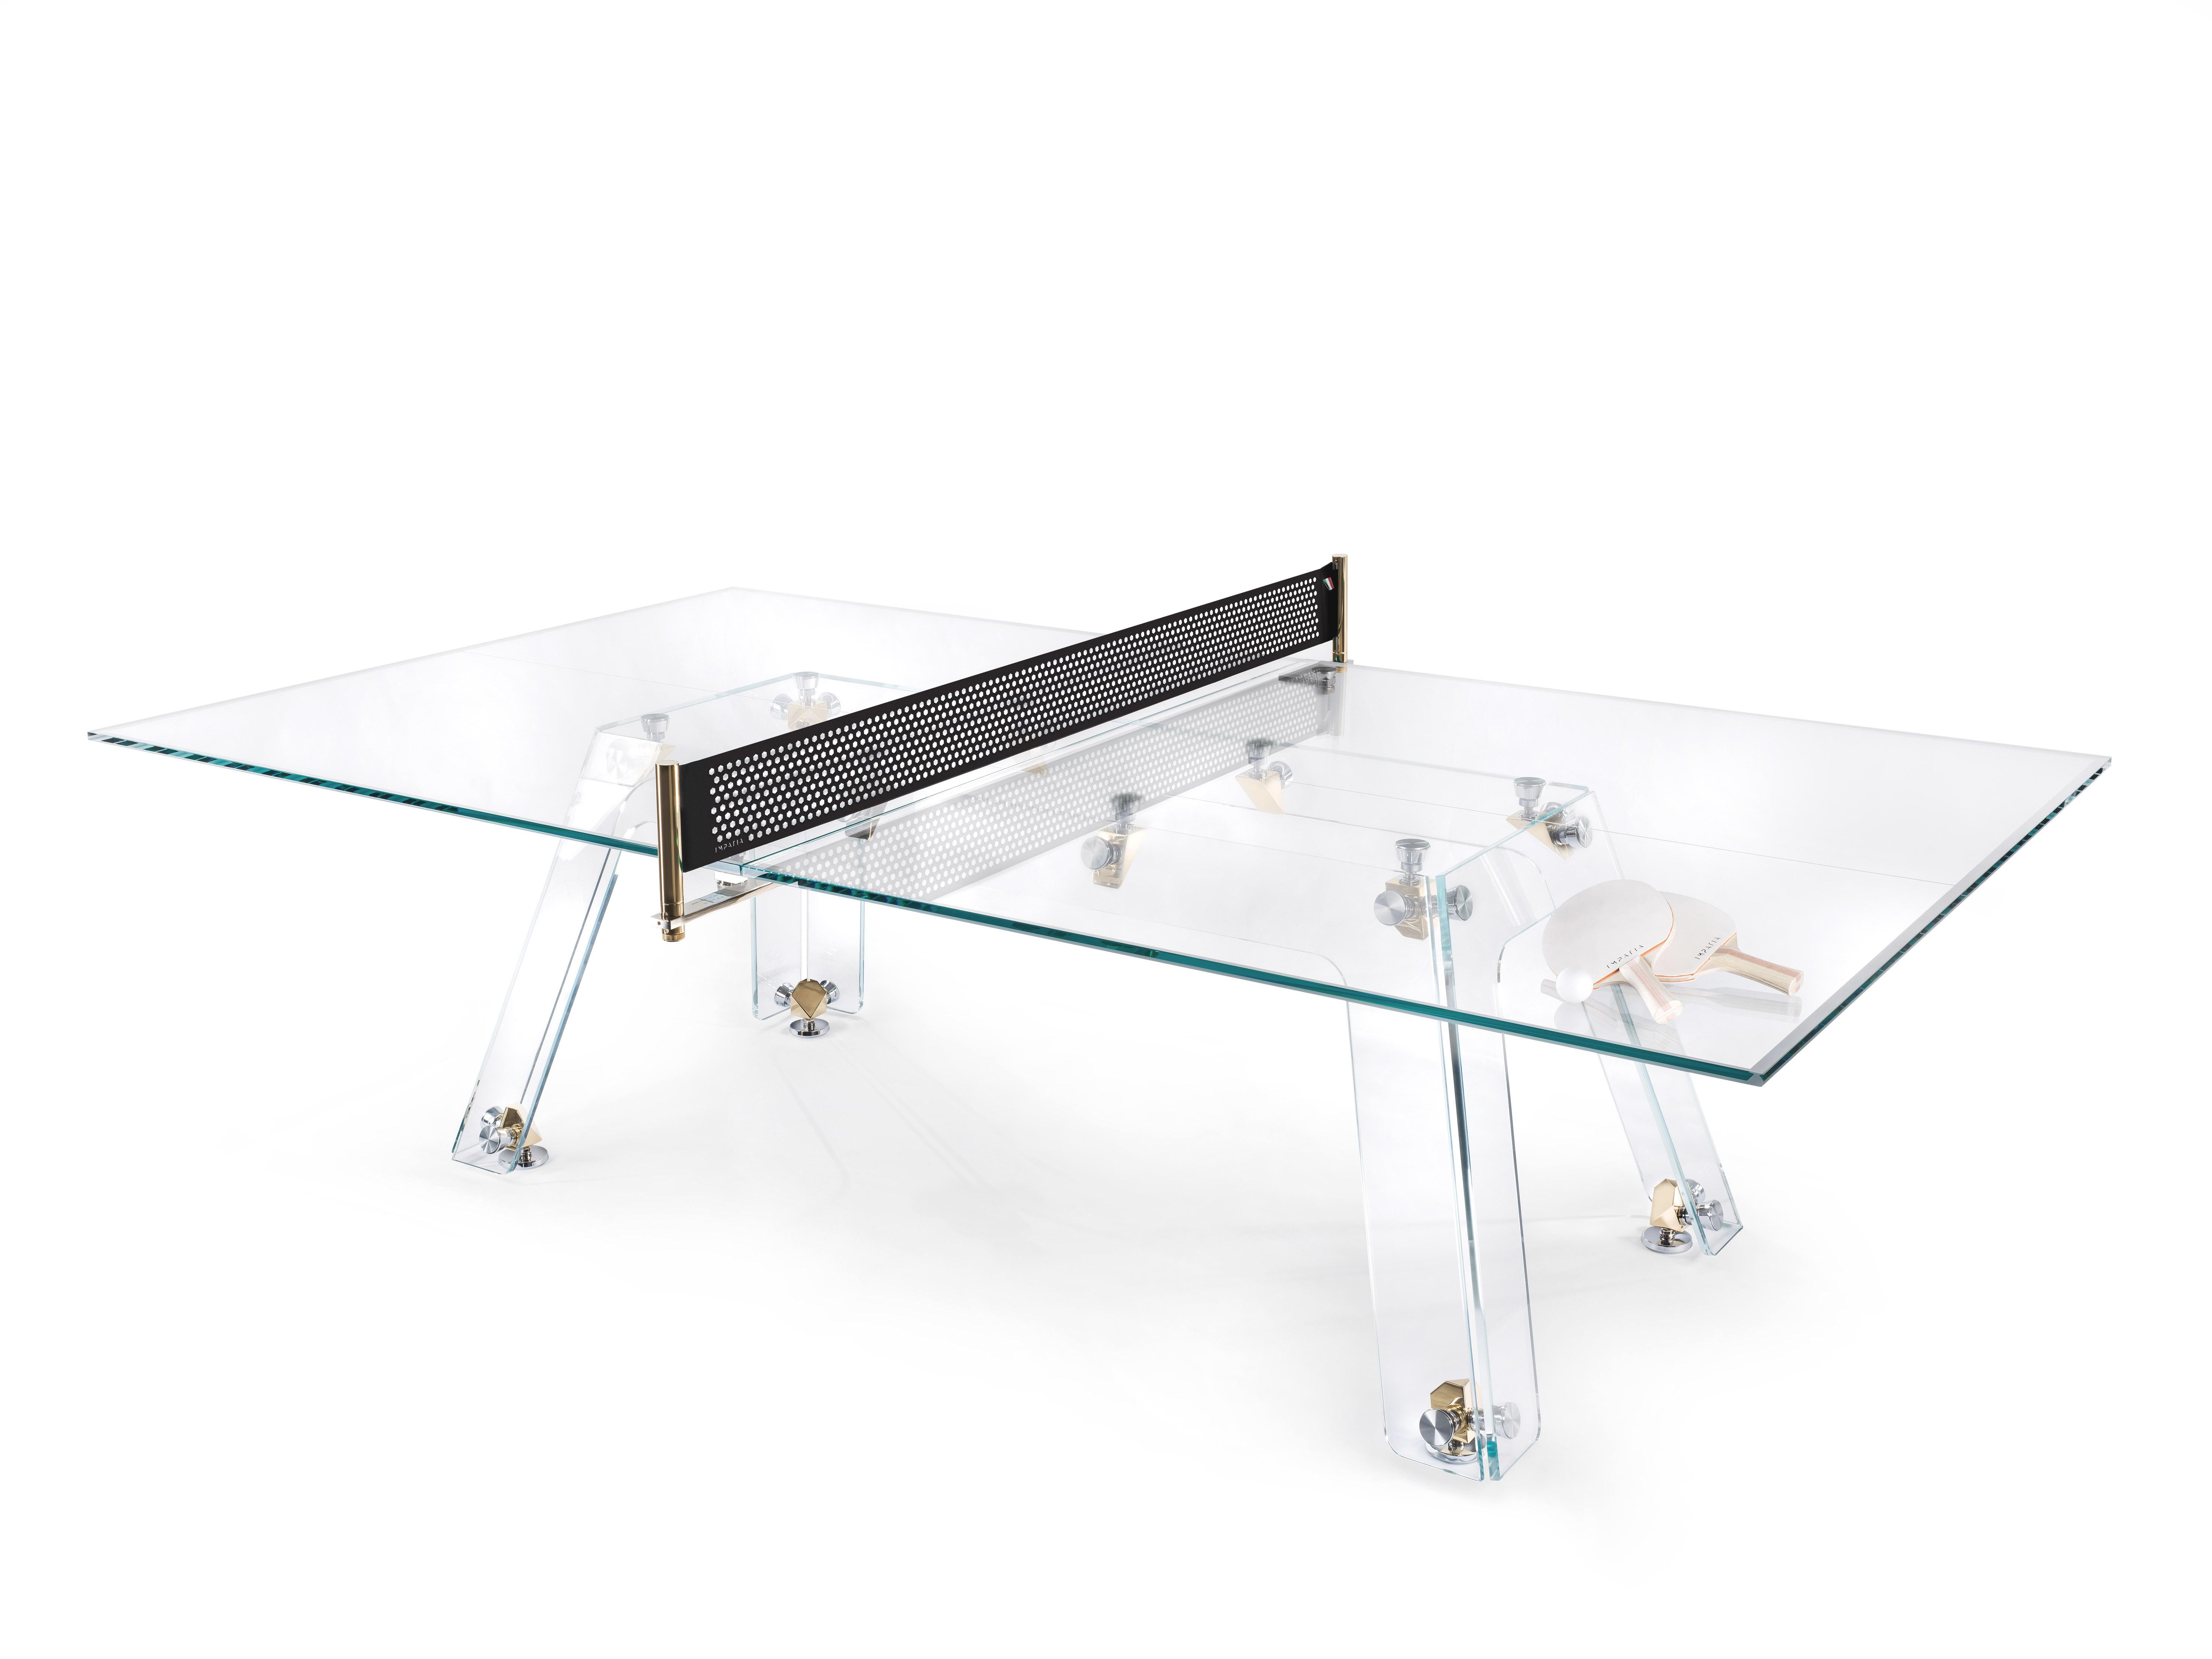 Lungolinea gold table tennis by Impatia
Dimensions: D 274 x W 152.5 x H 76 cm
Weight: 220 kg
Material: low-iron glass, polished metal components, 24k gold plated connecting joints.
Also available: different colors and materials.

The idea of